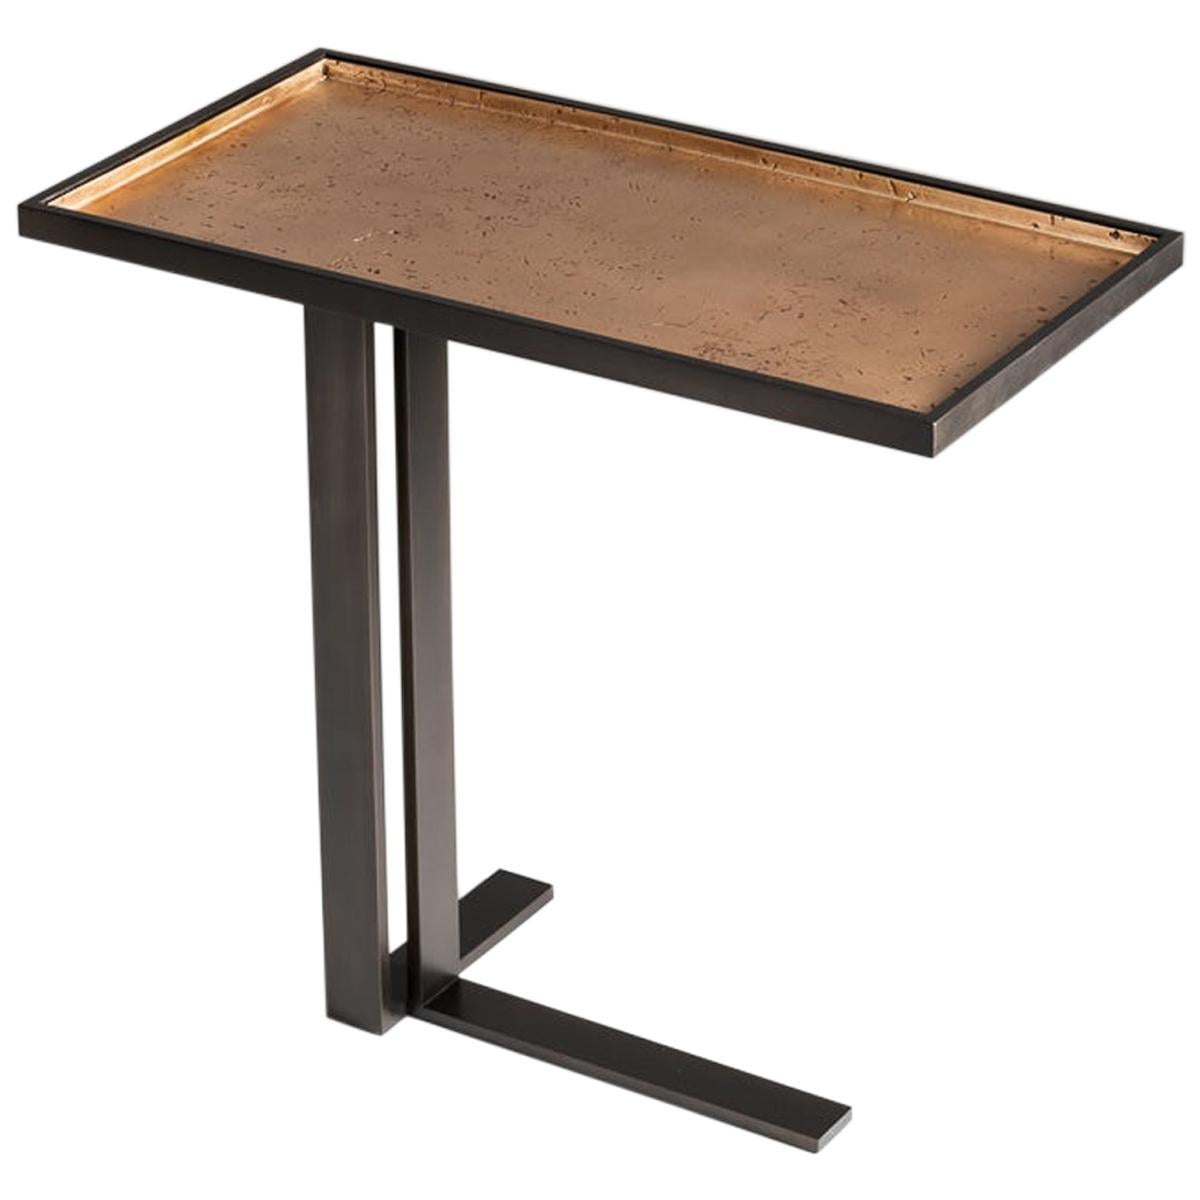 Douglas Fanning, Contemporary Bronze and Steel Drinks Table, United States, 2020 For Sale